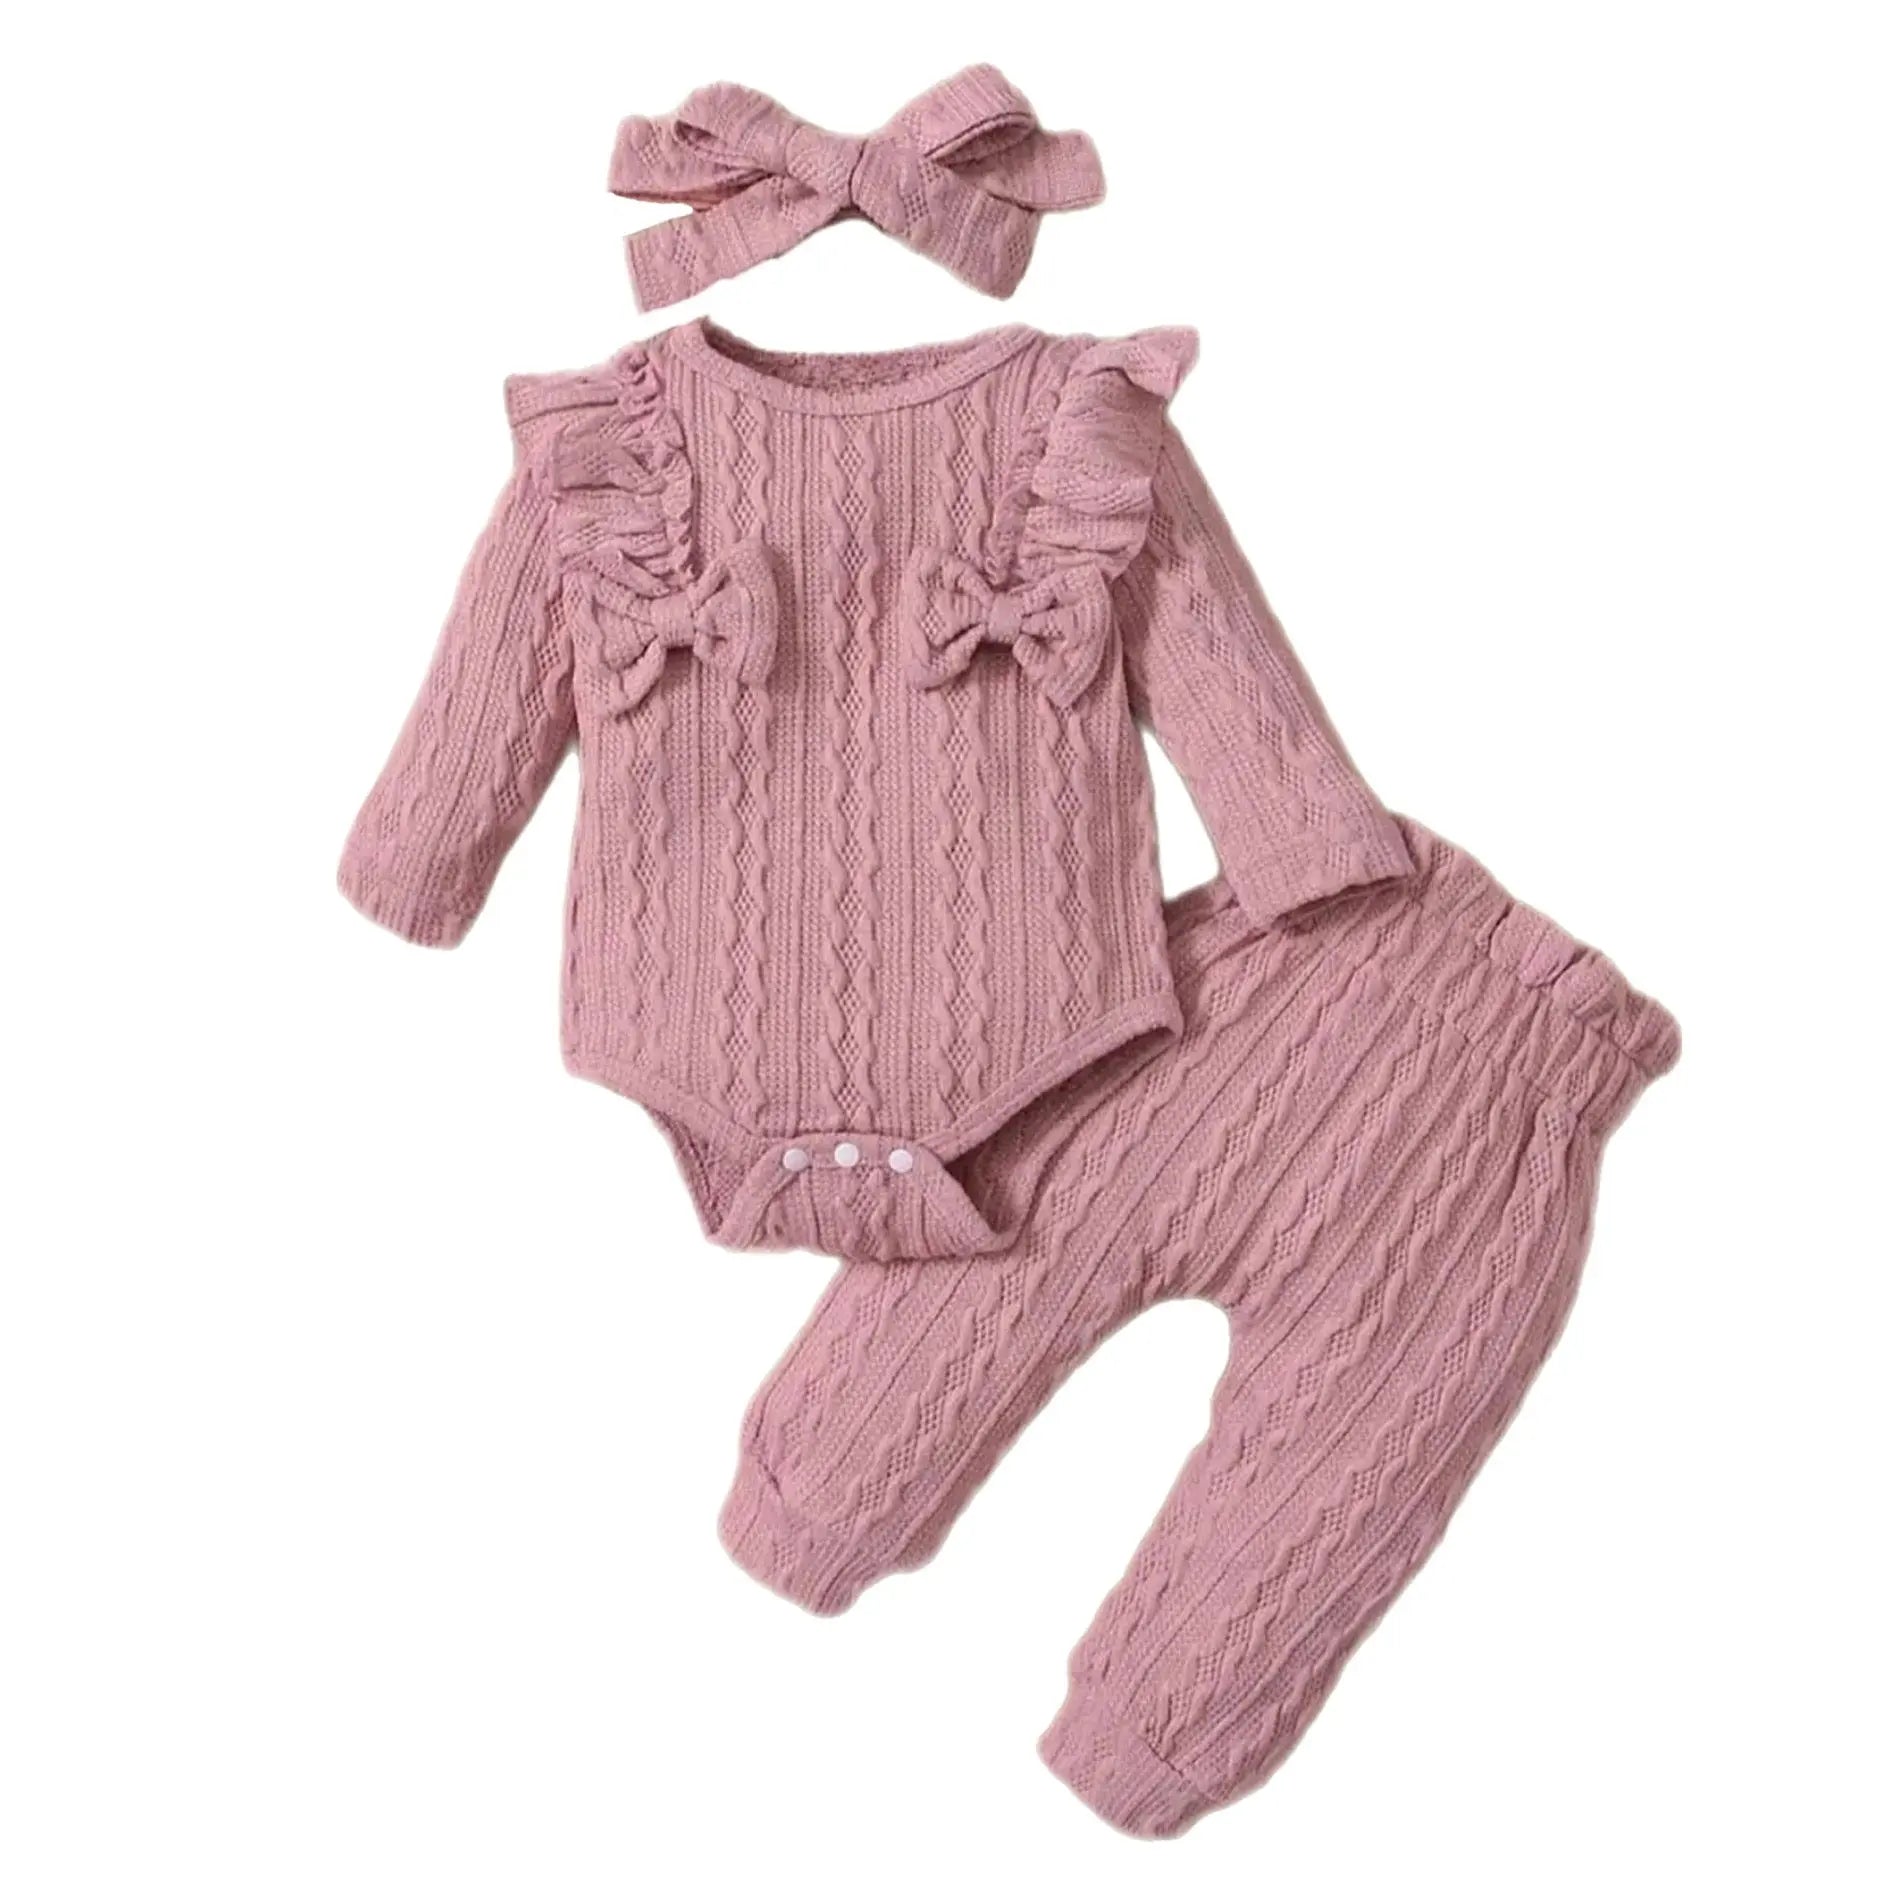 Baby Toddler Girls Knit Long Sleeve Romper Pants and Headband Set, Color